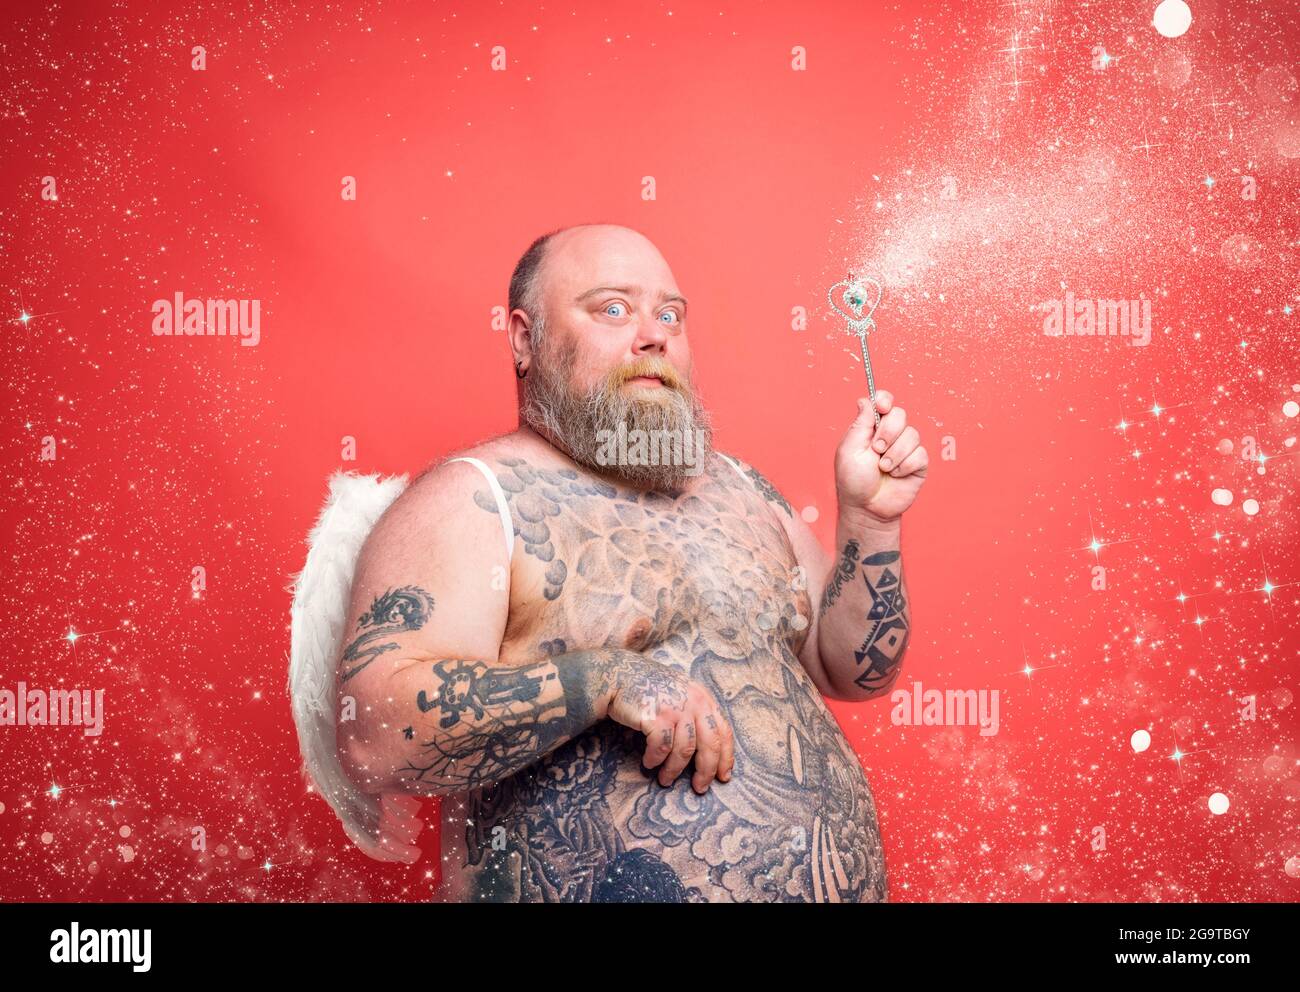 Fat thoughtful man with beard ,tattoos and wings acts like an magic fairy Stock Photo